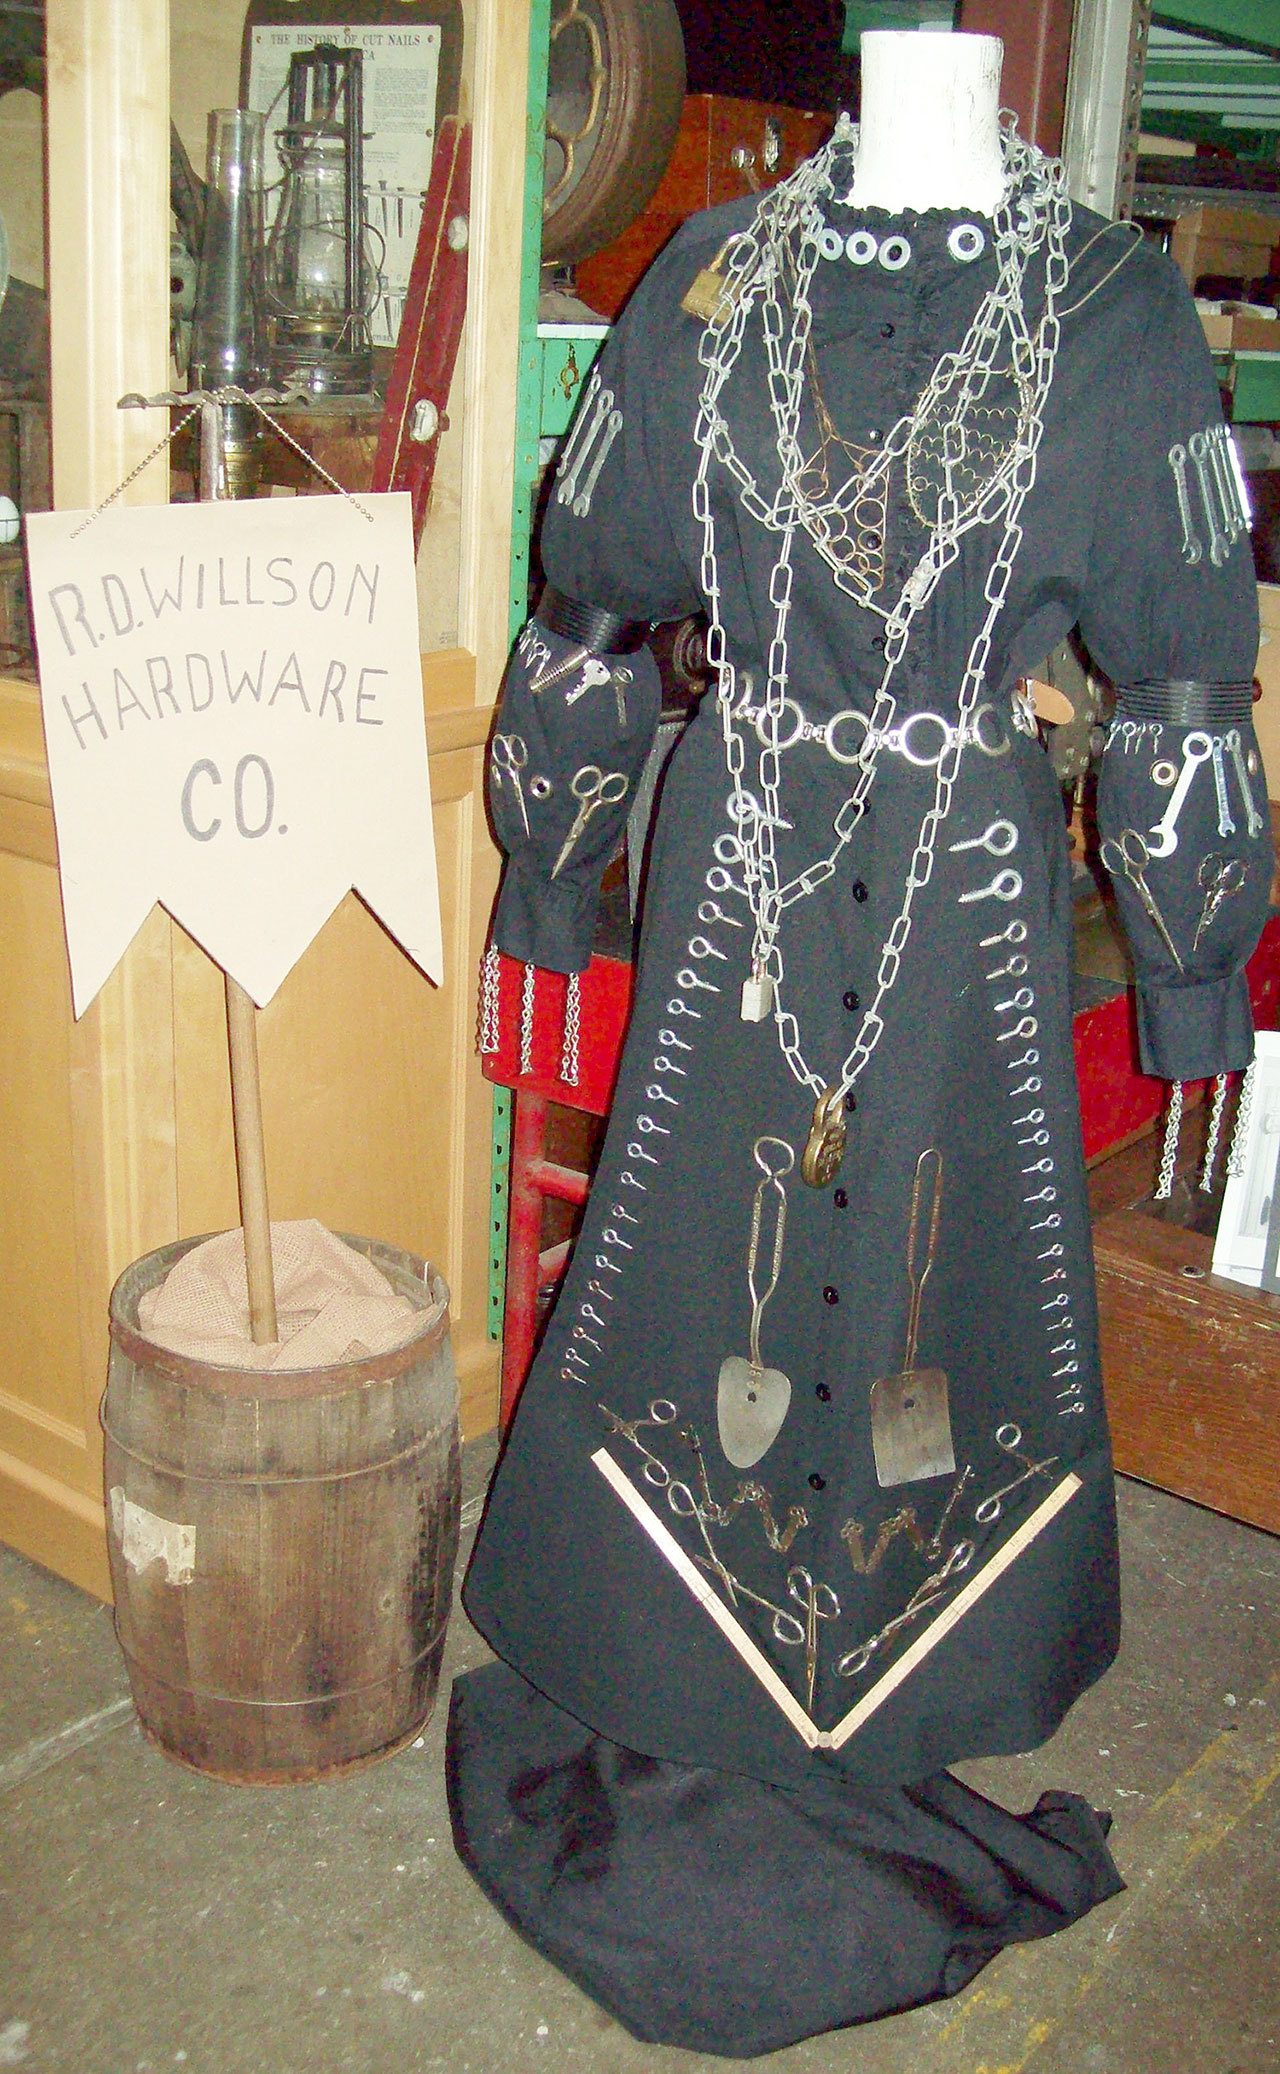 Clallam County Historical Society (3)                                The “Hardware Dress,” as worn by R.D. Willson’s daughter, Mary, in an advertisement for the Port Angeles store. At right, Janice Noonan re-created the “Hardware Dress” recently for the Clallam County Historical Society.